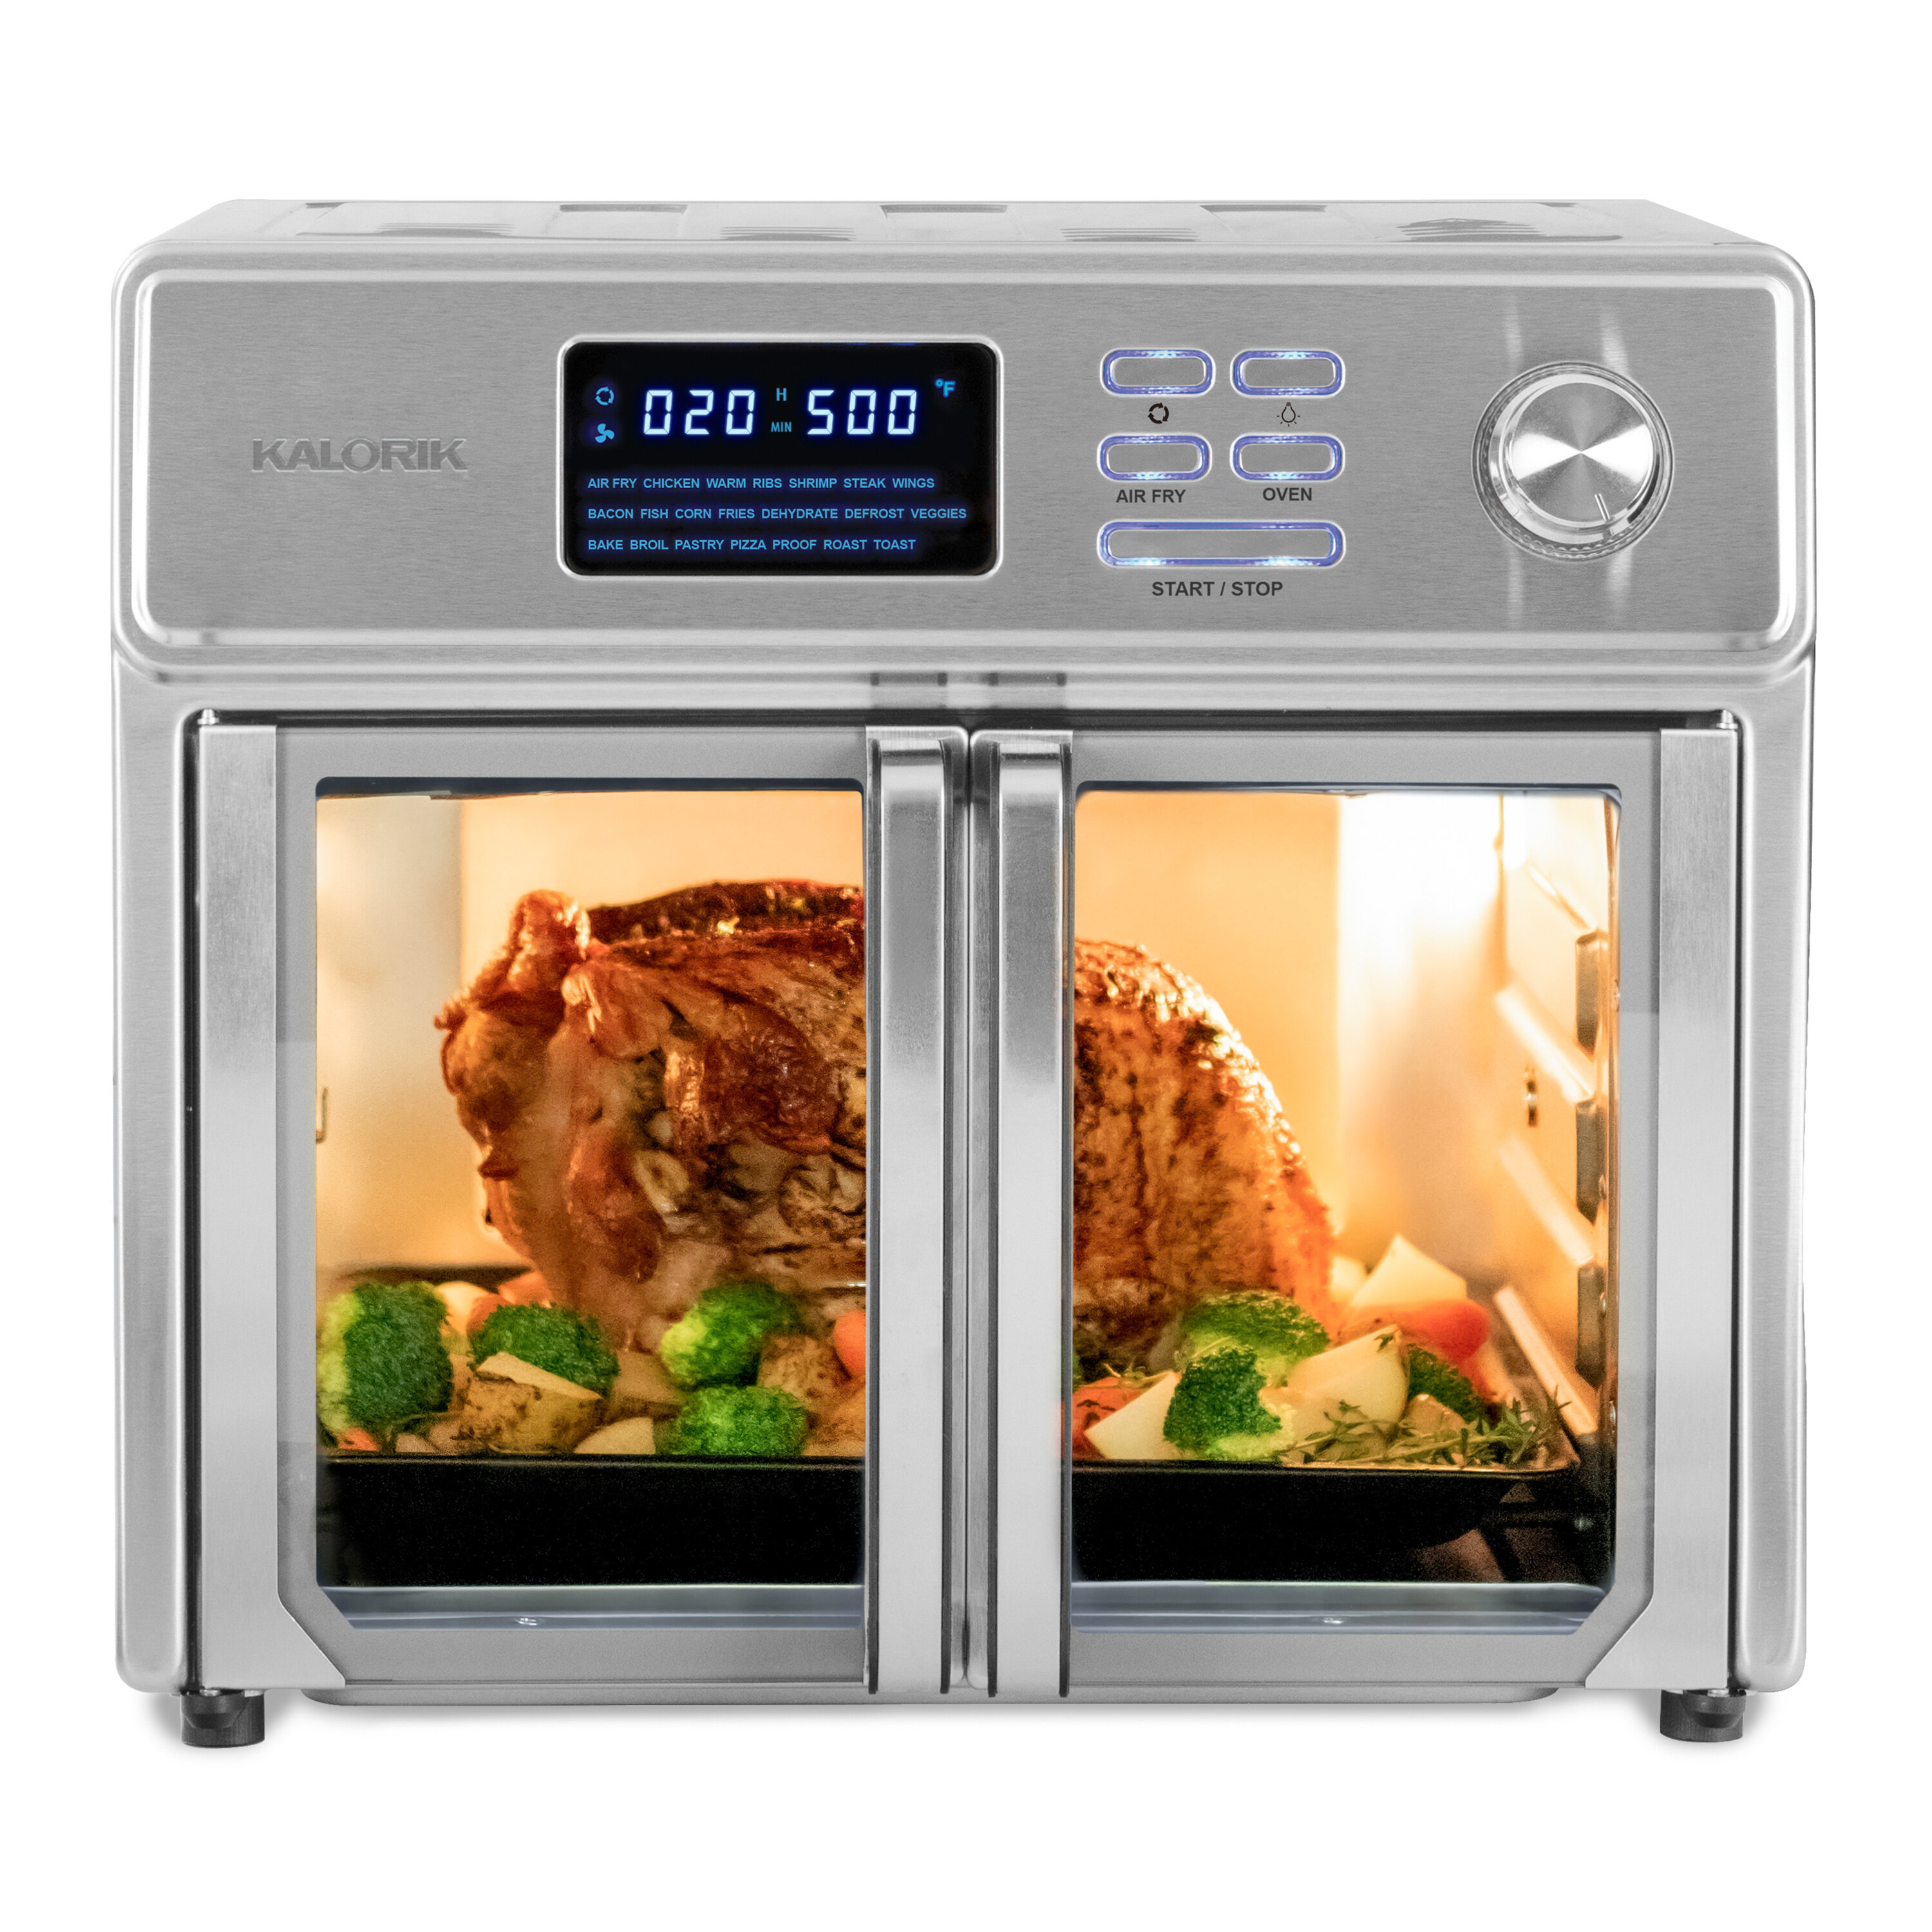 Introducing the French Door 360 Air Fryer with XL 26-qt Capacity by Emeril  Lagasse 